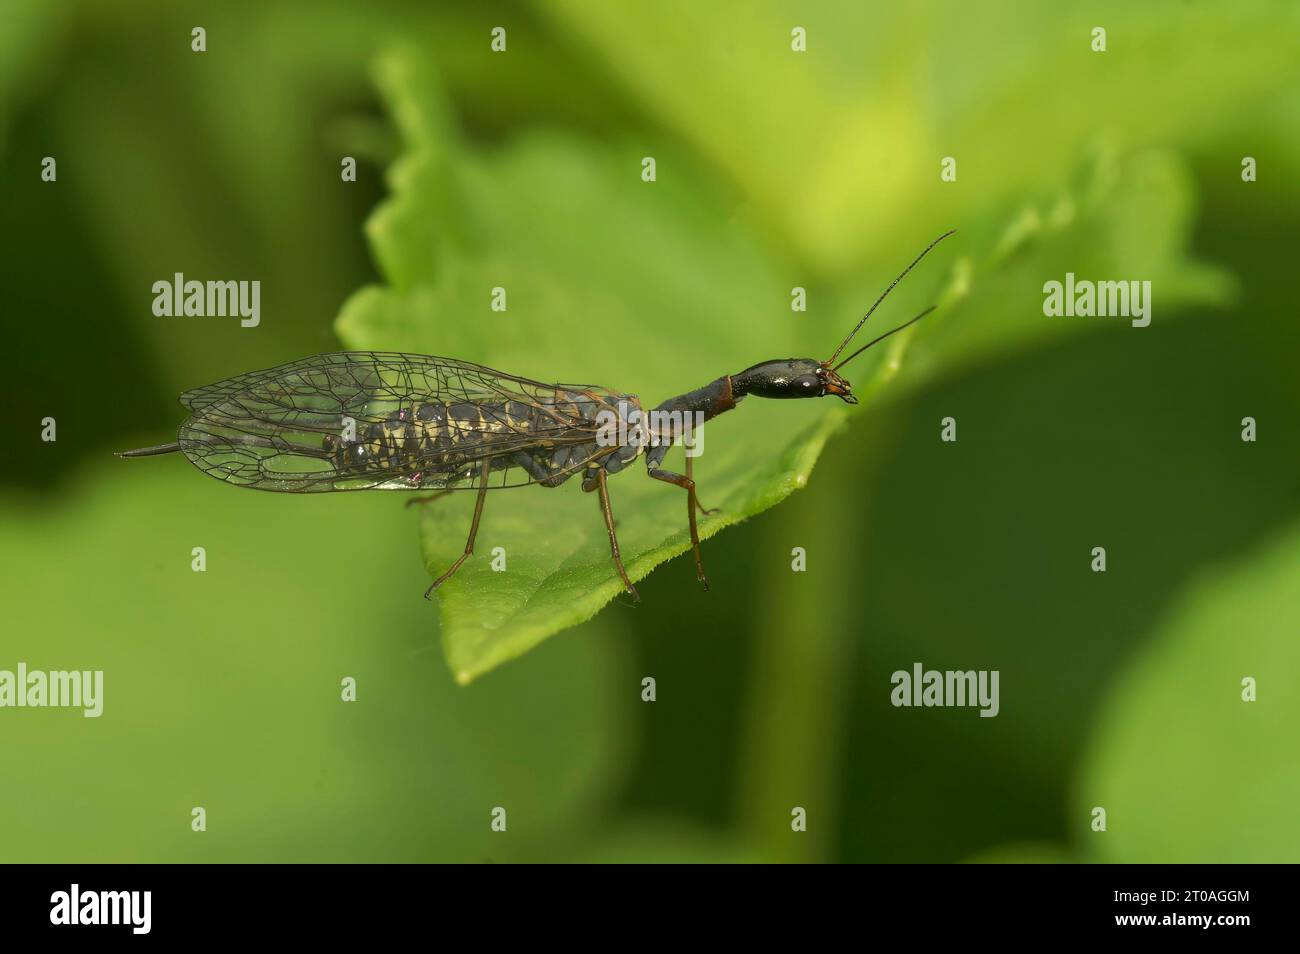 Natural selective focus closeup on a bizarre looking snake fly, Subilla confinis, sitting on a green leaf Stock Photo